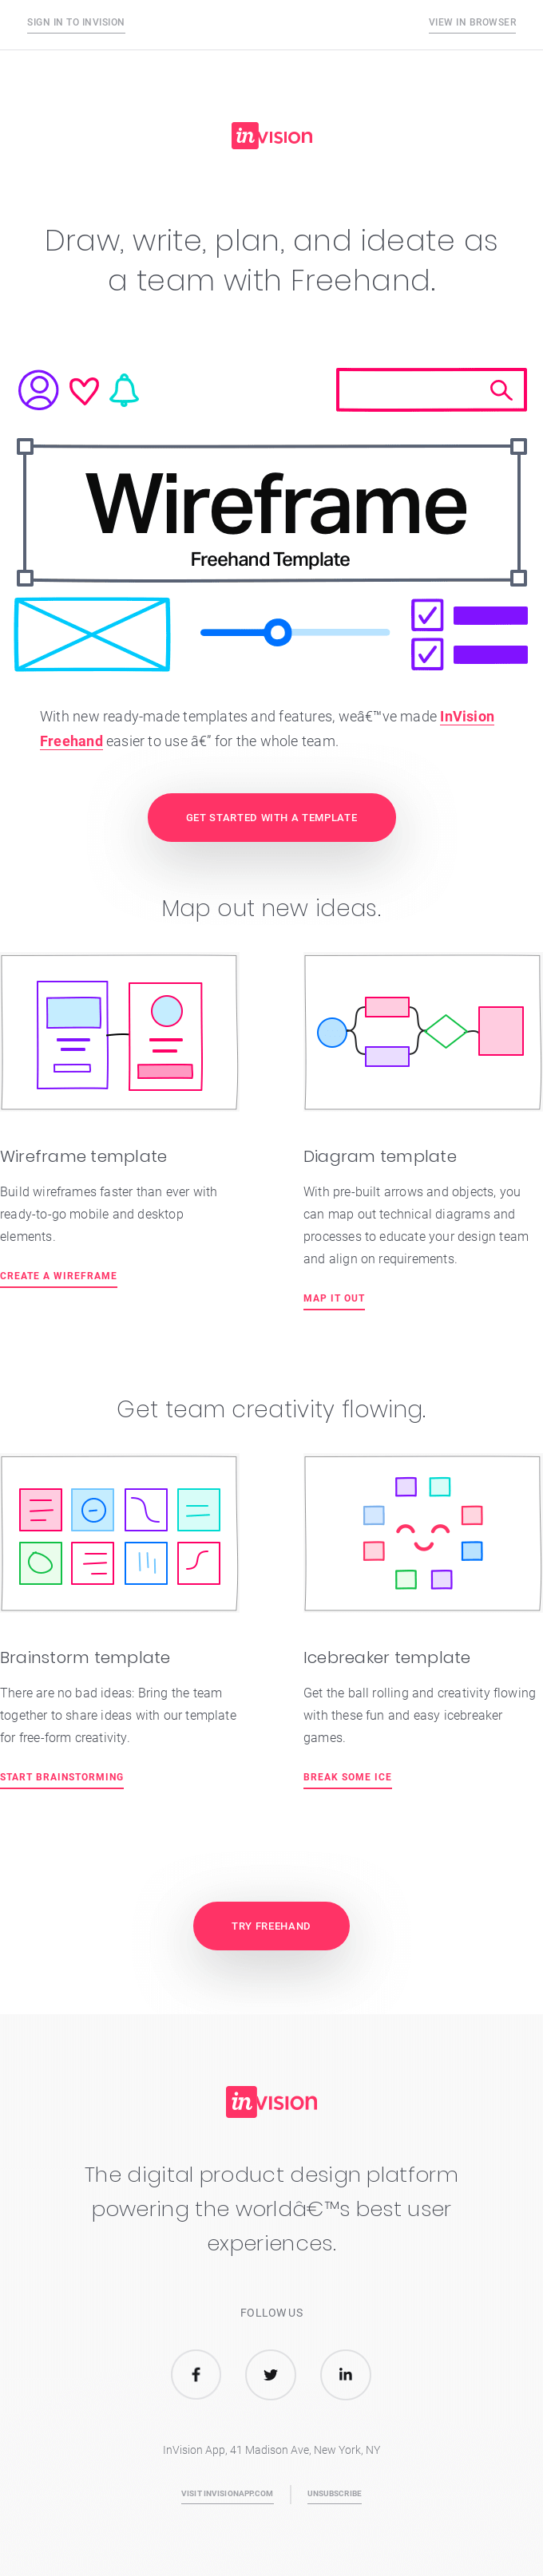 new-for-freehand-templates-for-brainstorms-wireframes-and-more